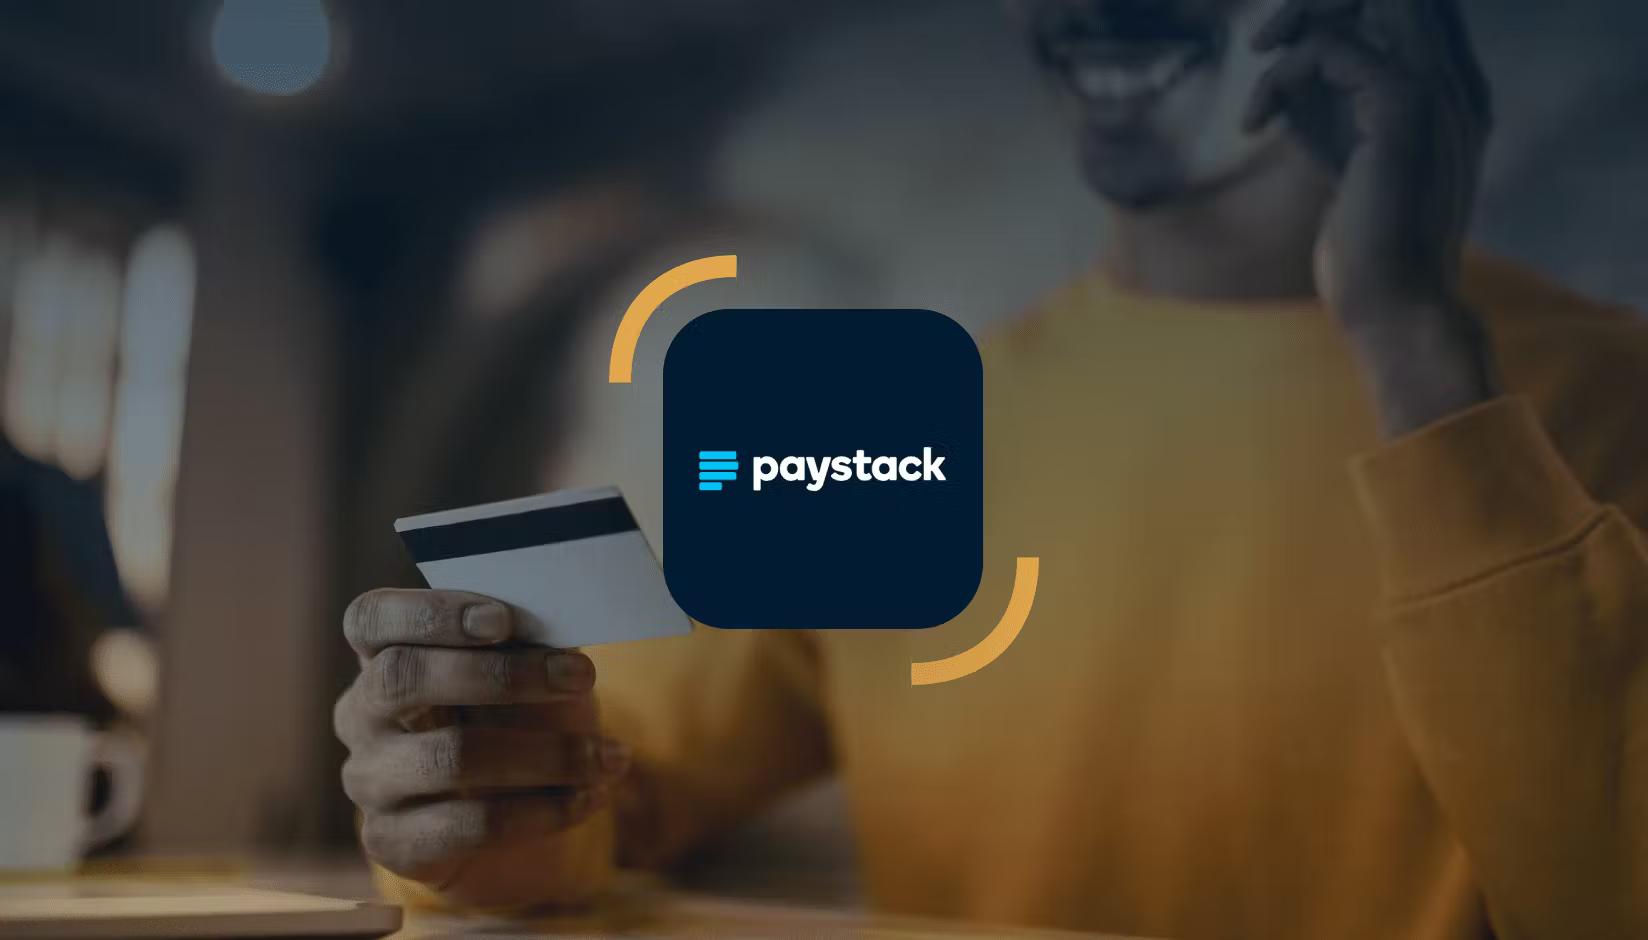 Paystack Revolutionizes Payments with Direct Debit Launch in Nigeria 🇳🇬